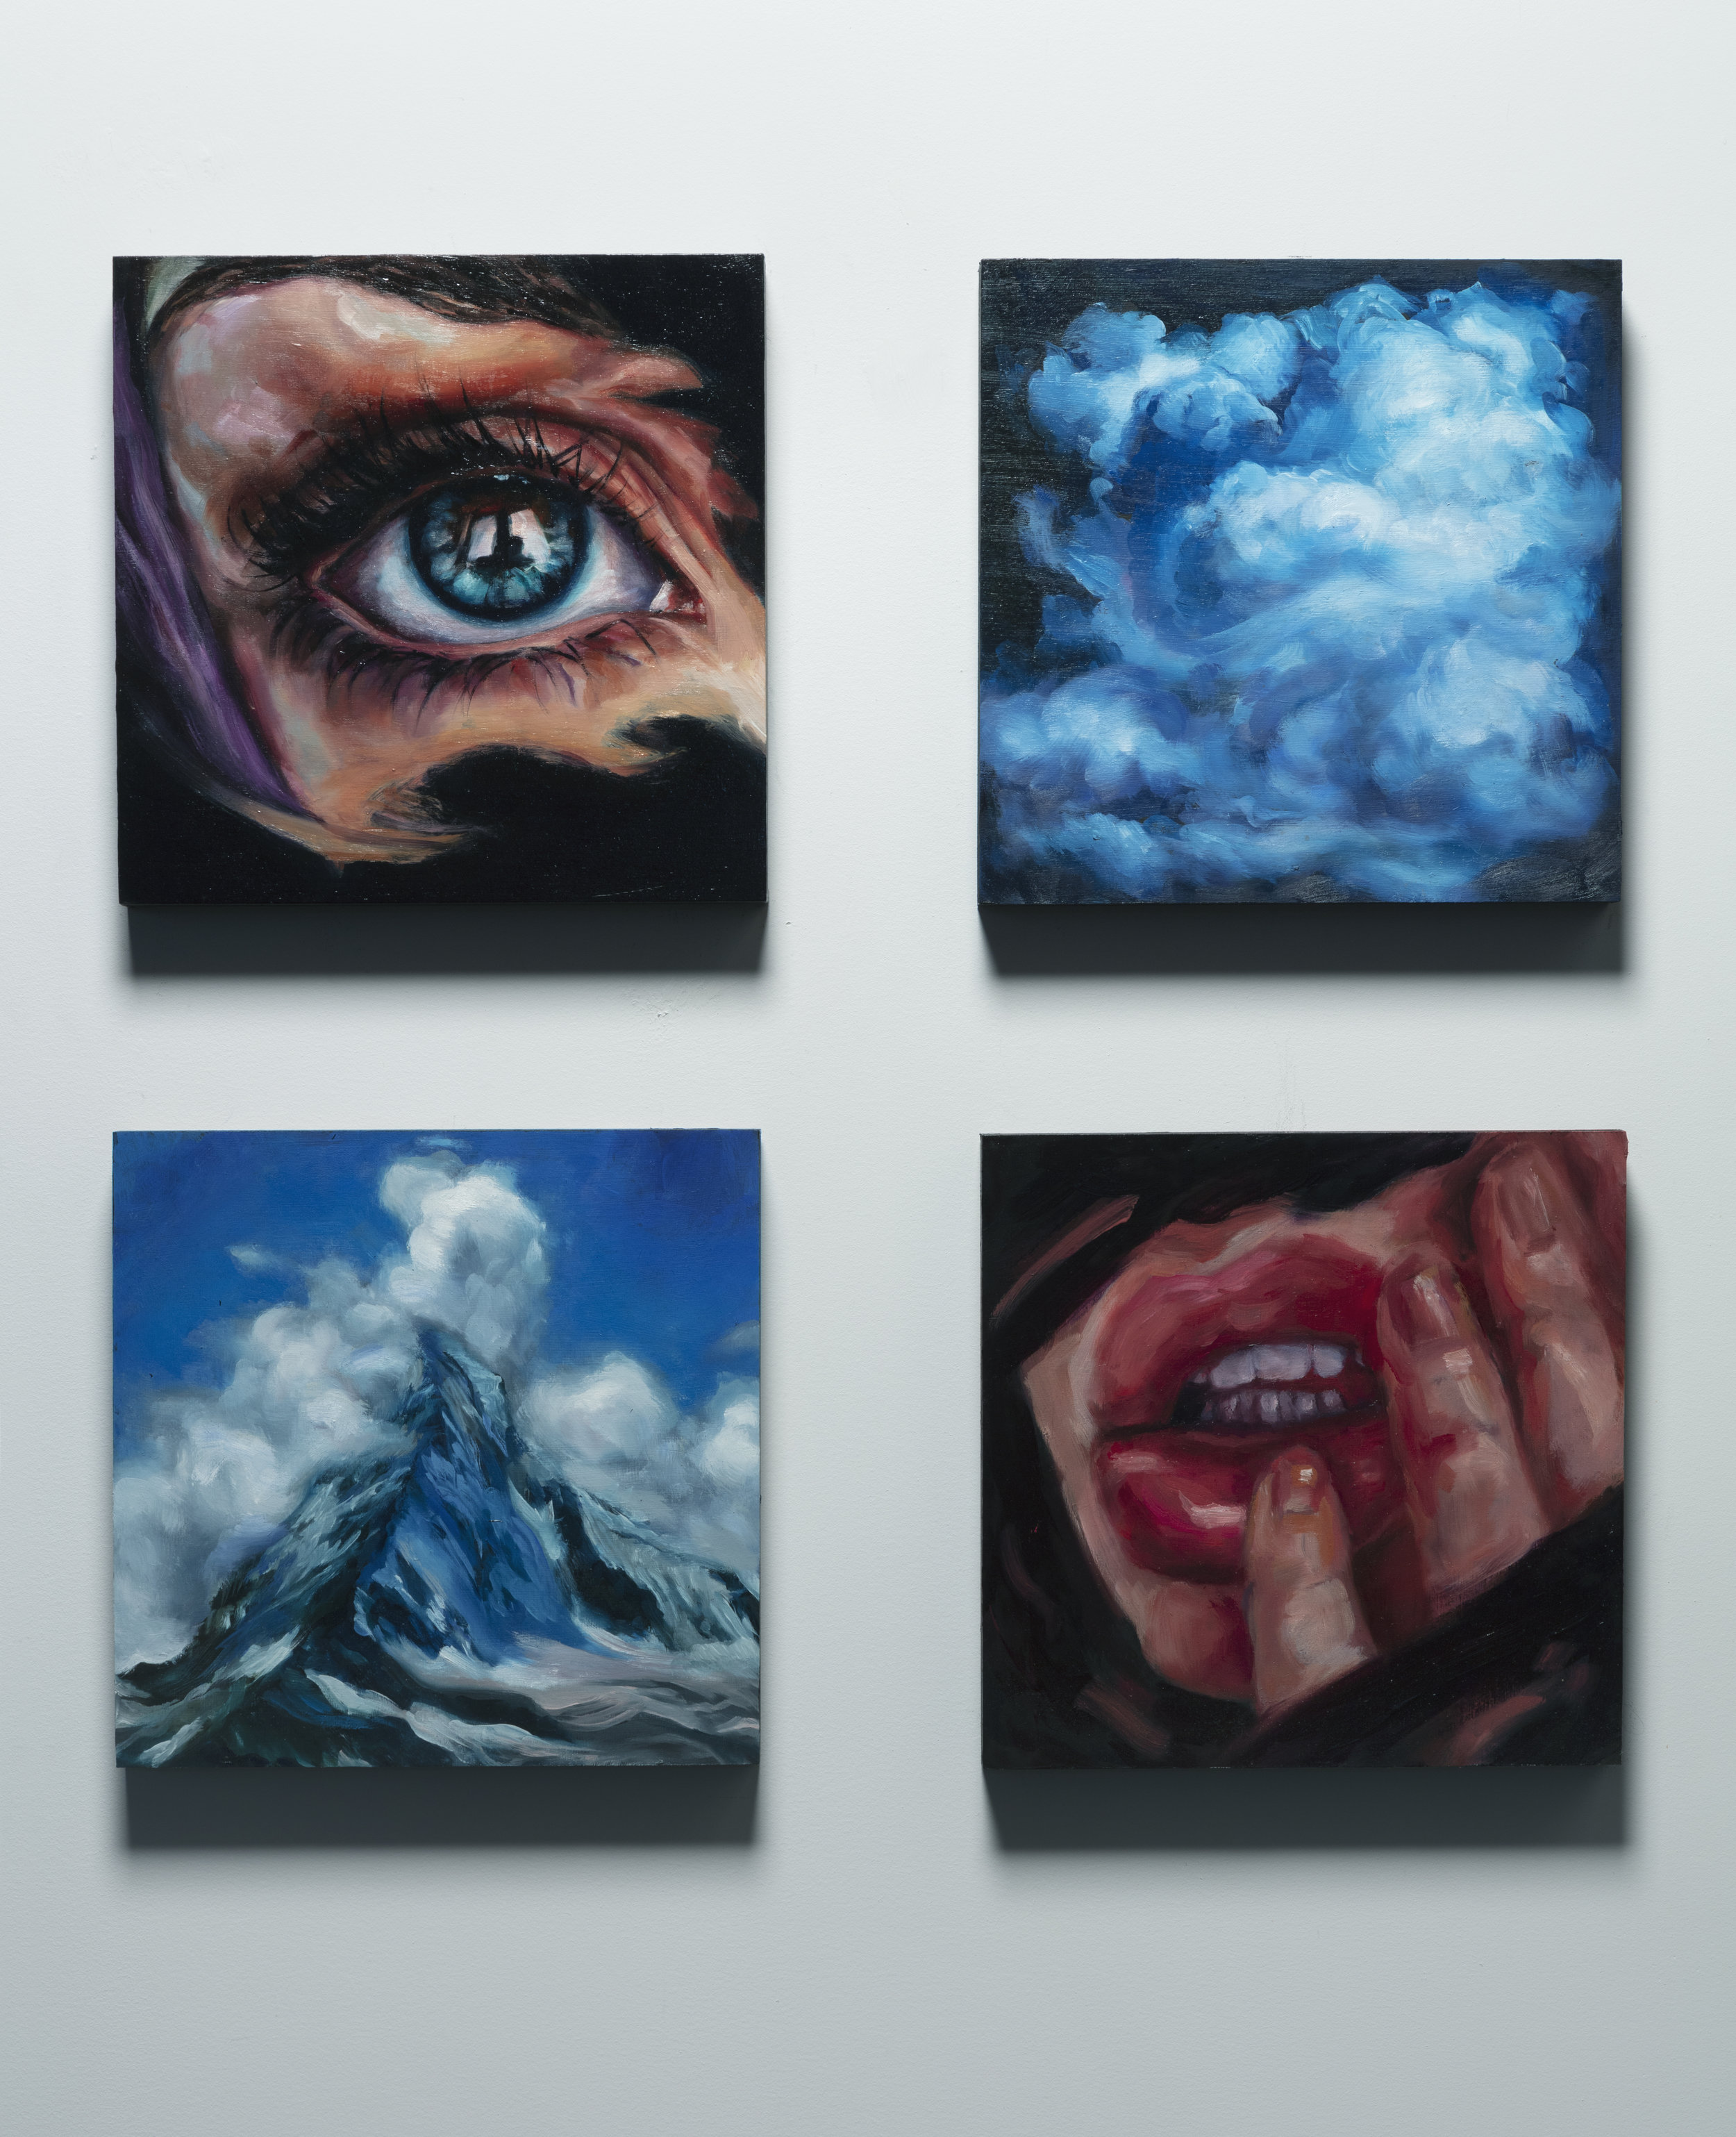  (Watching, Lost, Ascending and Breathing)   4 x 30.5x30.5cm (12x12”) oil on panels  